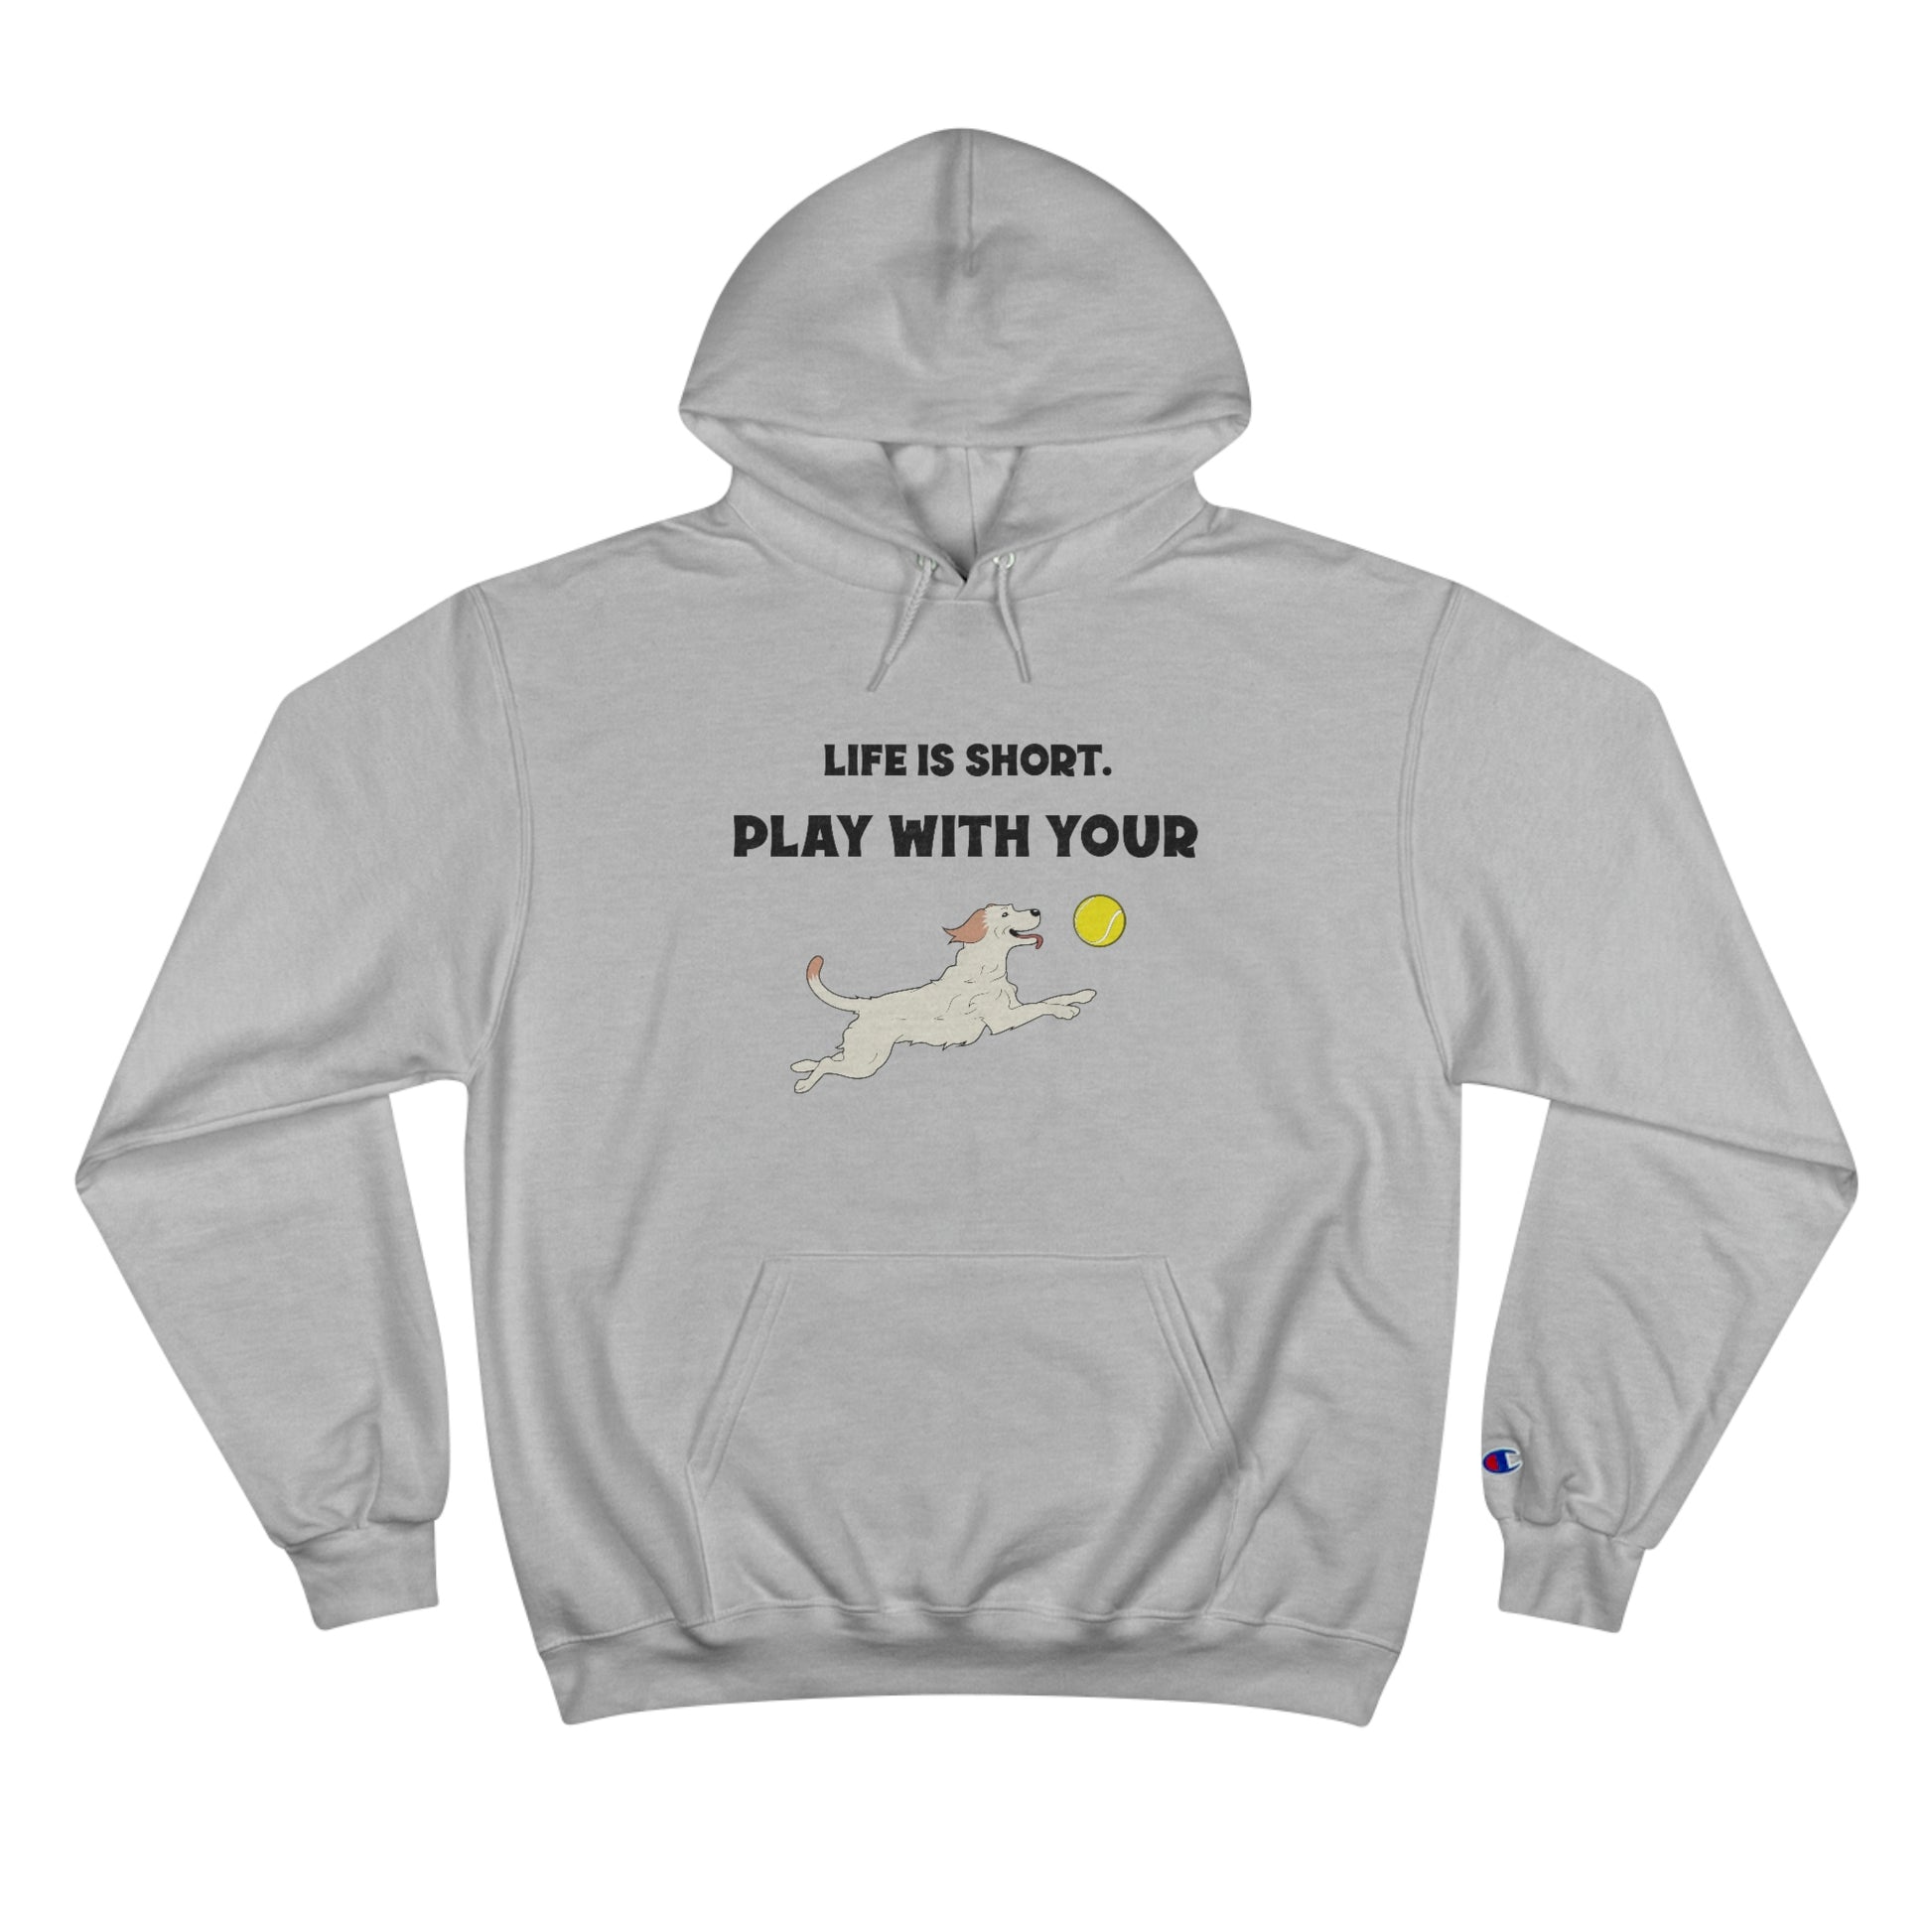 Life is Short, Play with your Dog hoodie - Tortuna